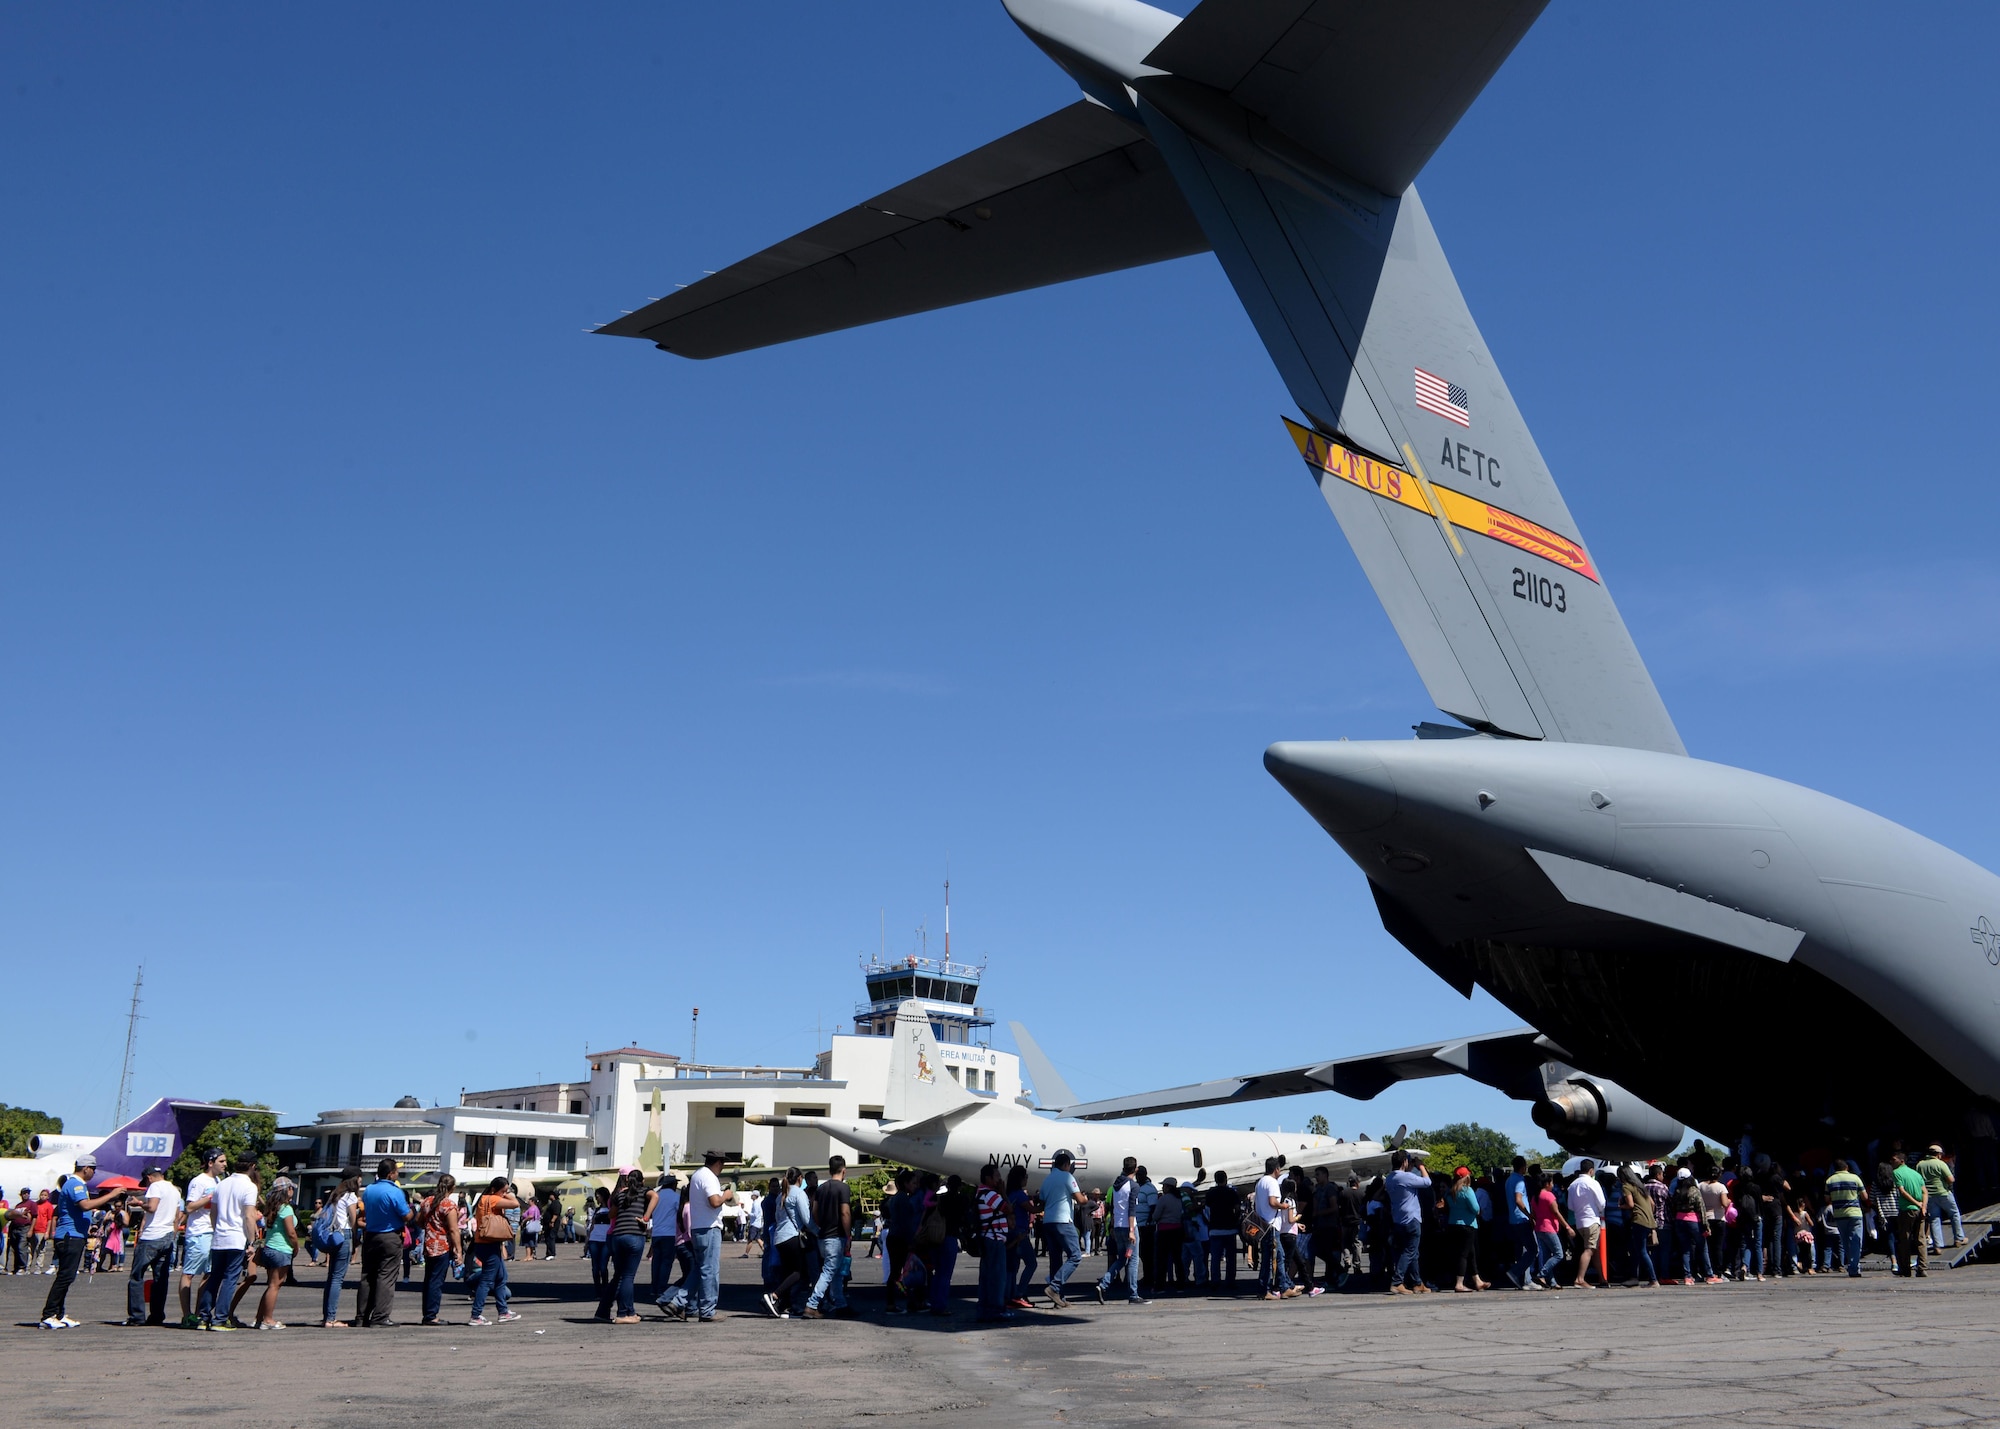 Citizens from El Salvador, line up to enter a U.S. Air Force C-17 Globemaster III cargo aircraft, 58th Airlift Squadron, at Ilopango International Airport in San Salvador, El Savador, Jan. 30, during the 2016 Ilopango Airshow. The C-17 was sent from Altus Air Force Base, Okla., to foster relationships between the U.S. and El Salvador. The aircraft was setup as a static display for the attendees to view and learn about some of its capabilities. (U.S. Air Force photo by Senior Airman Franklin R. Ramos/Released)